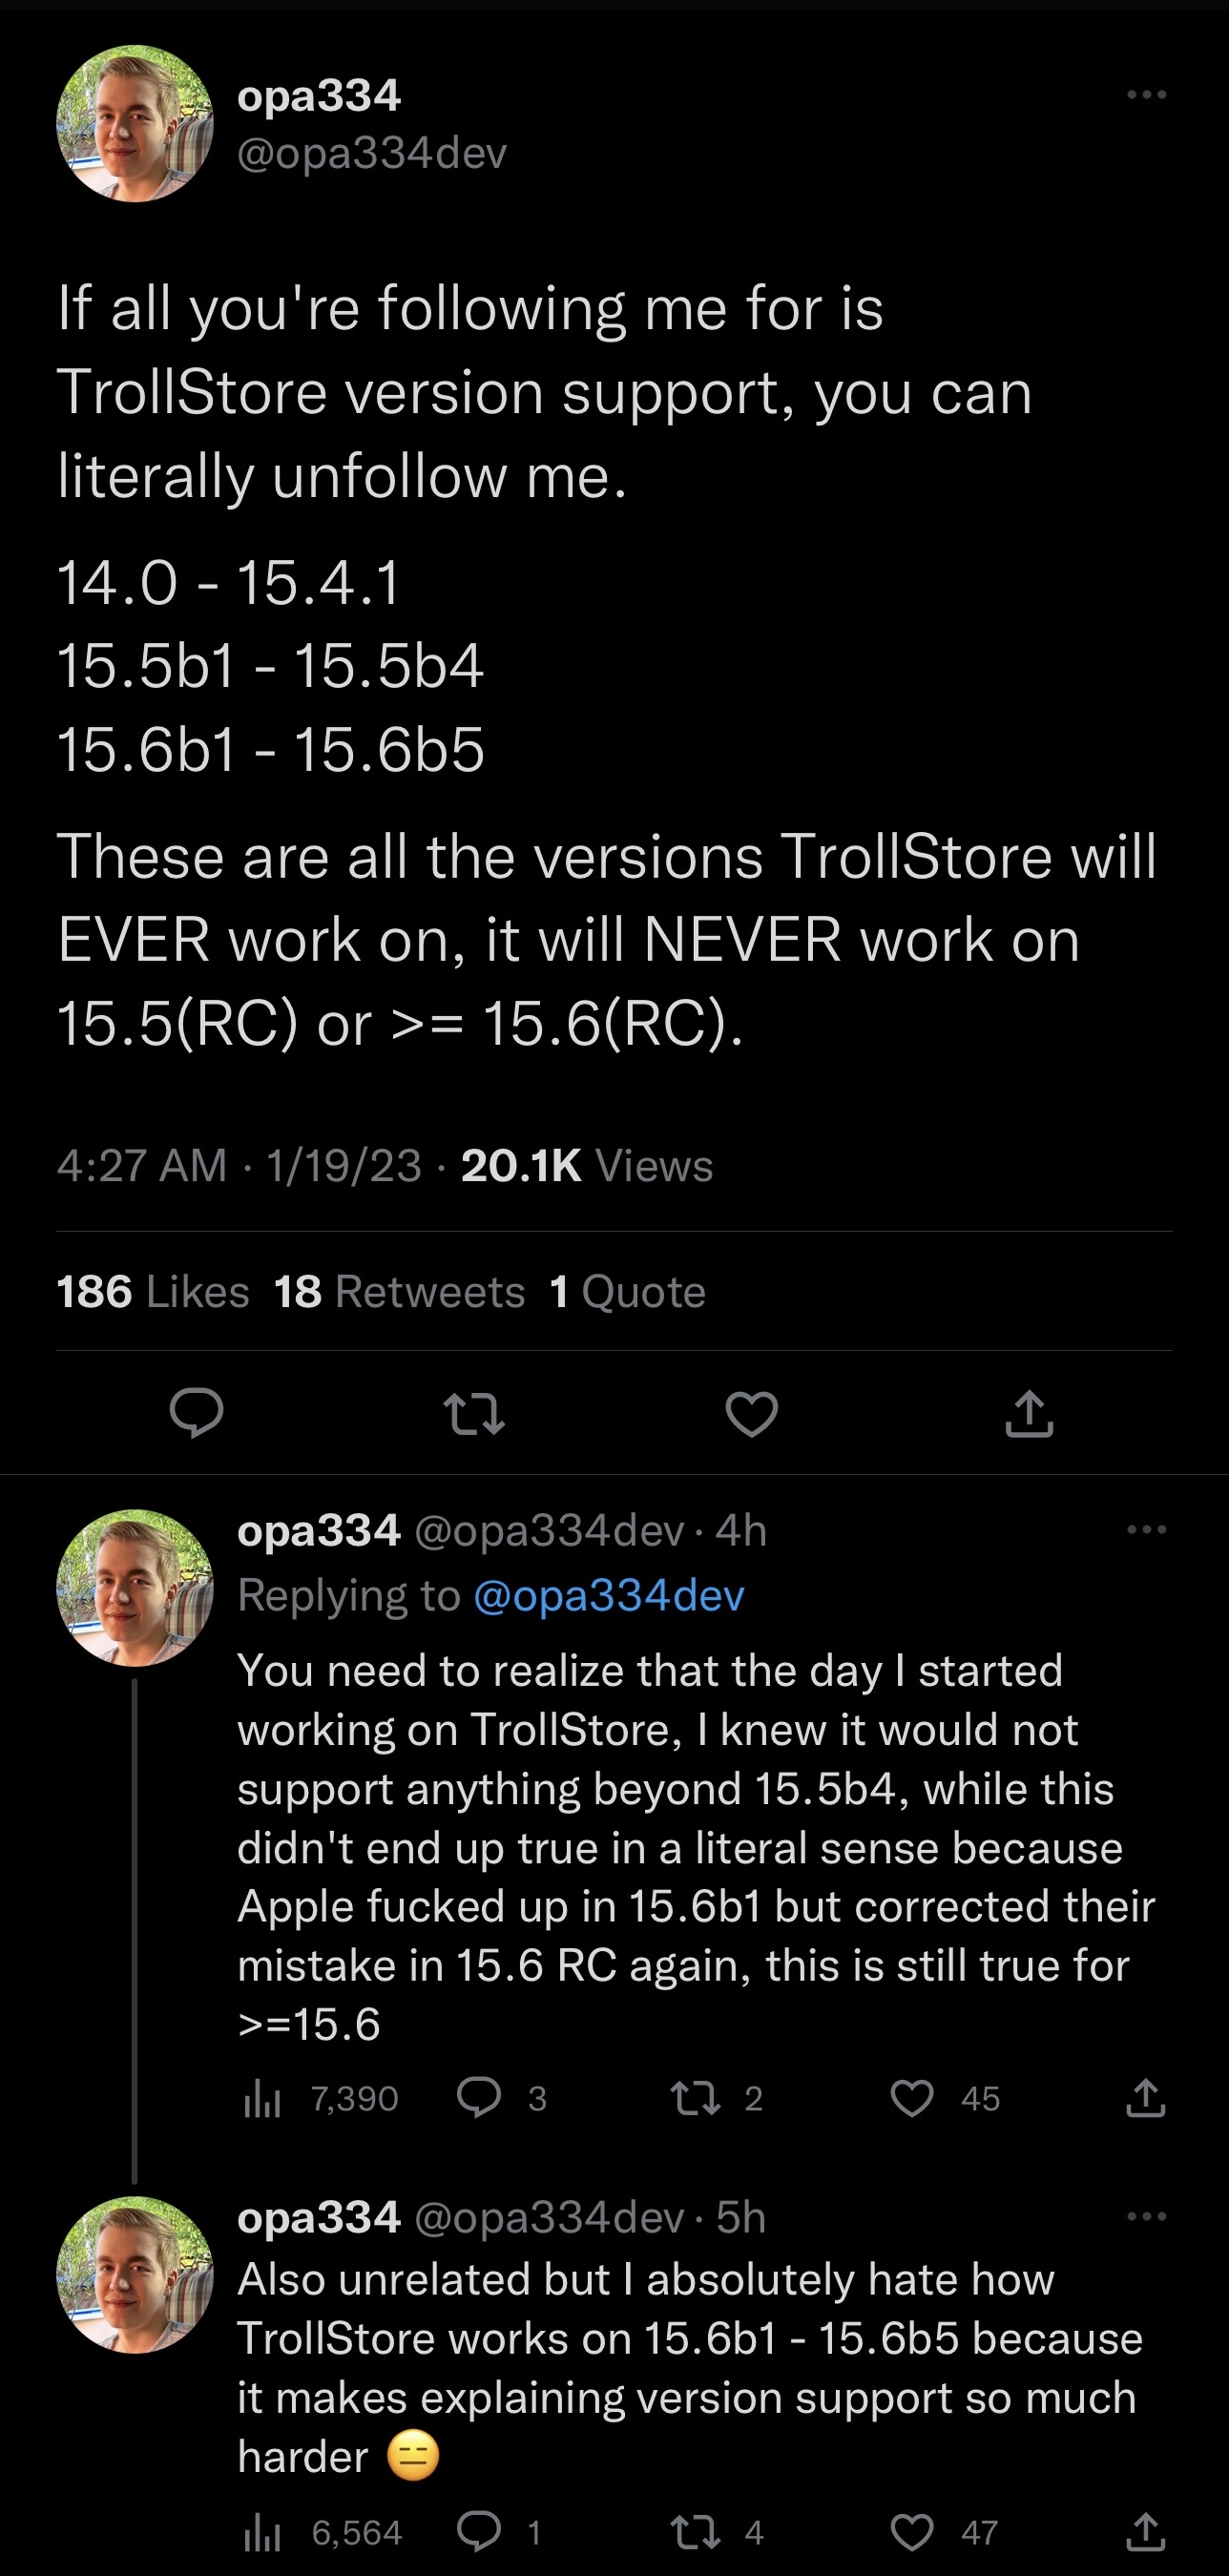 Opa334 says that TrollStore will never support any firmware newer than iOS 15.6 beta 5.